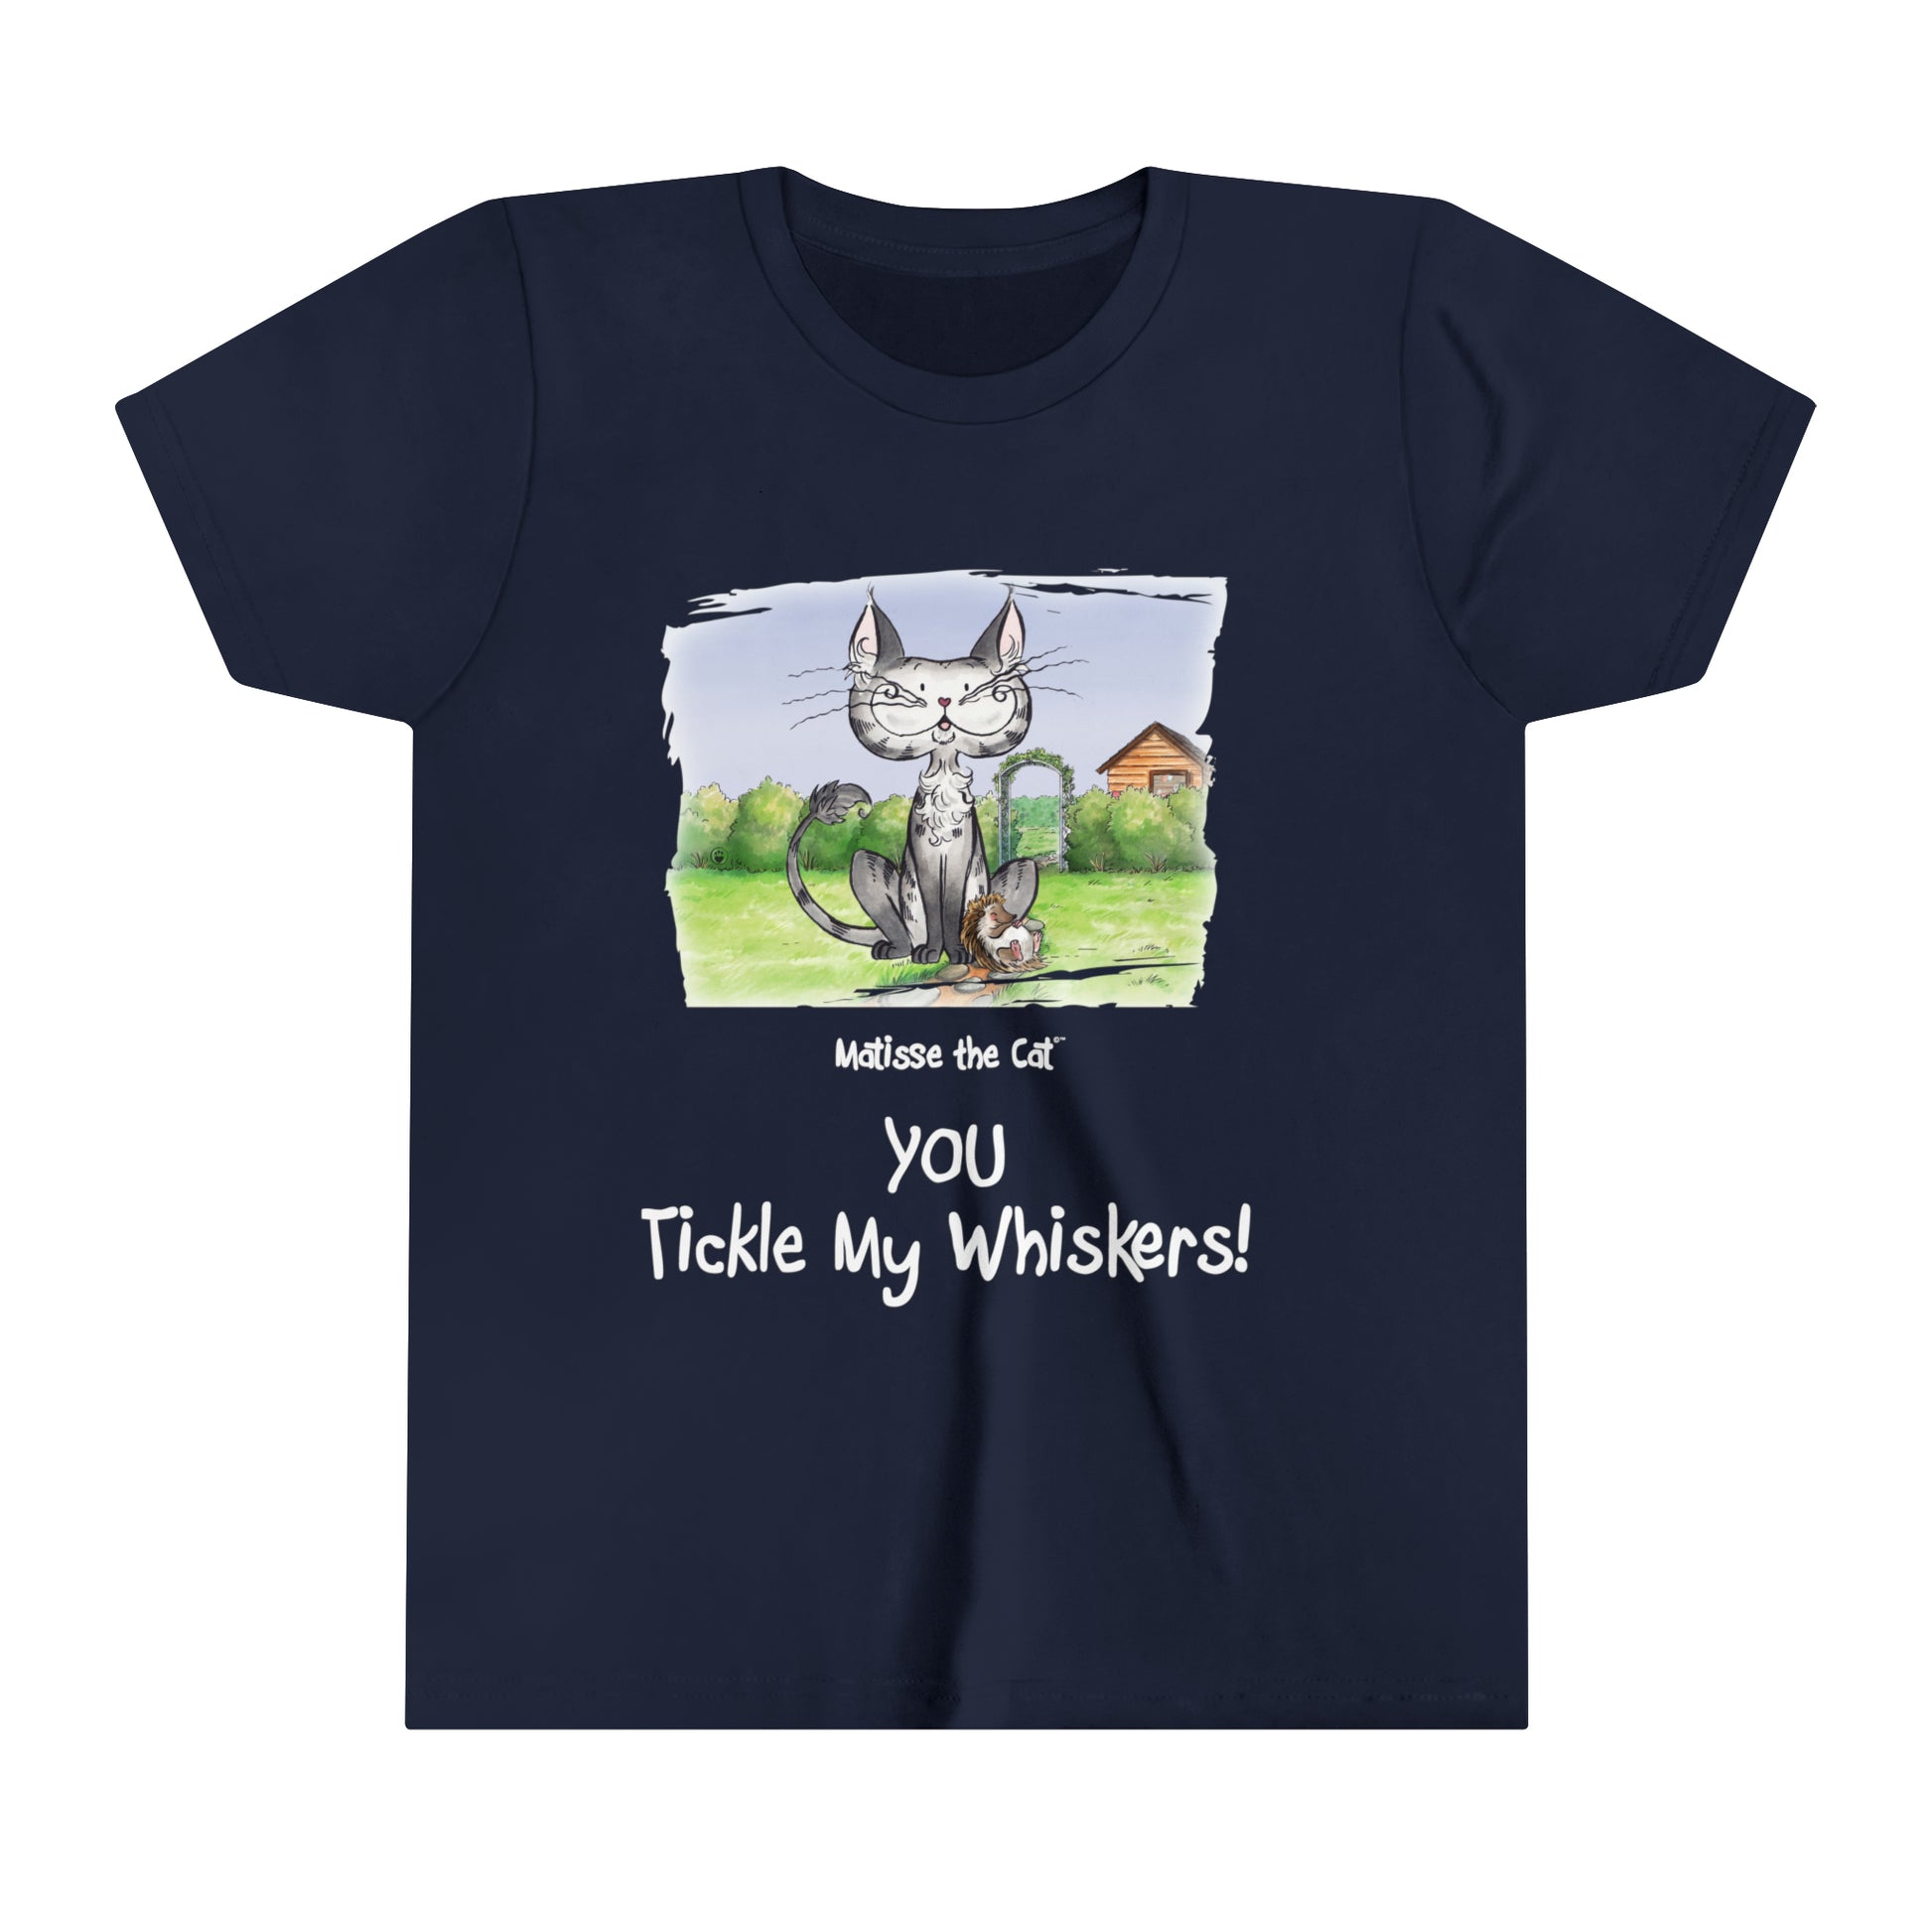 A navy blue official, Matisse the Cat children’s t-shirt with the slogan ‘YOU Tickle My Whiskers ‘ showcases Matisse sitting in his garden smiling with a sleeping hedgehog curled up beside him resting on his leg. 